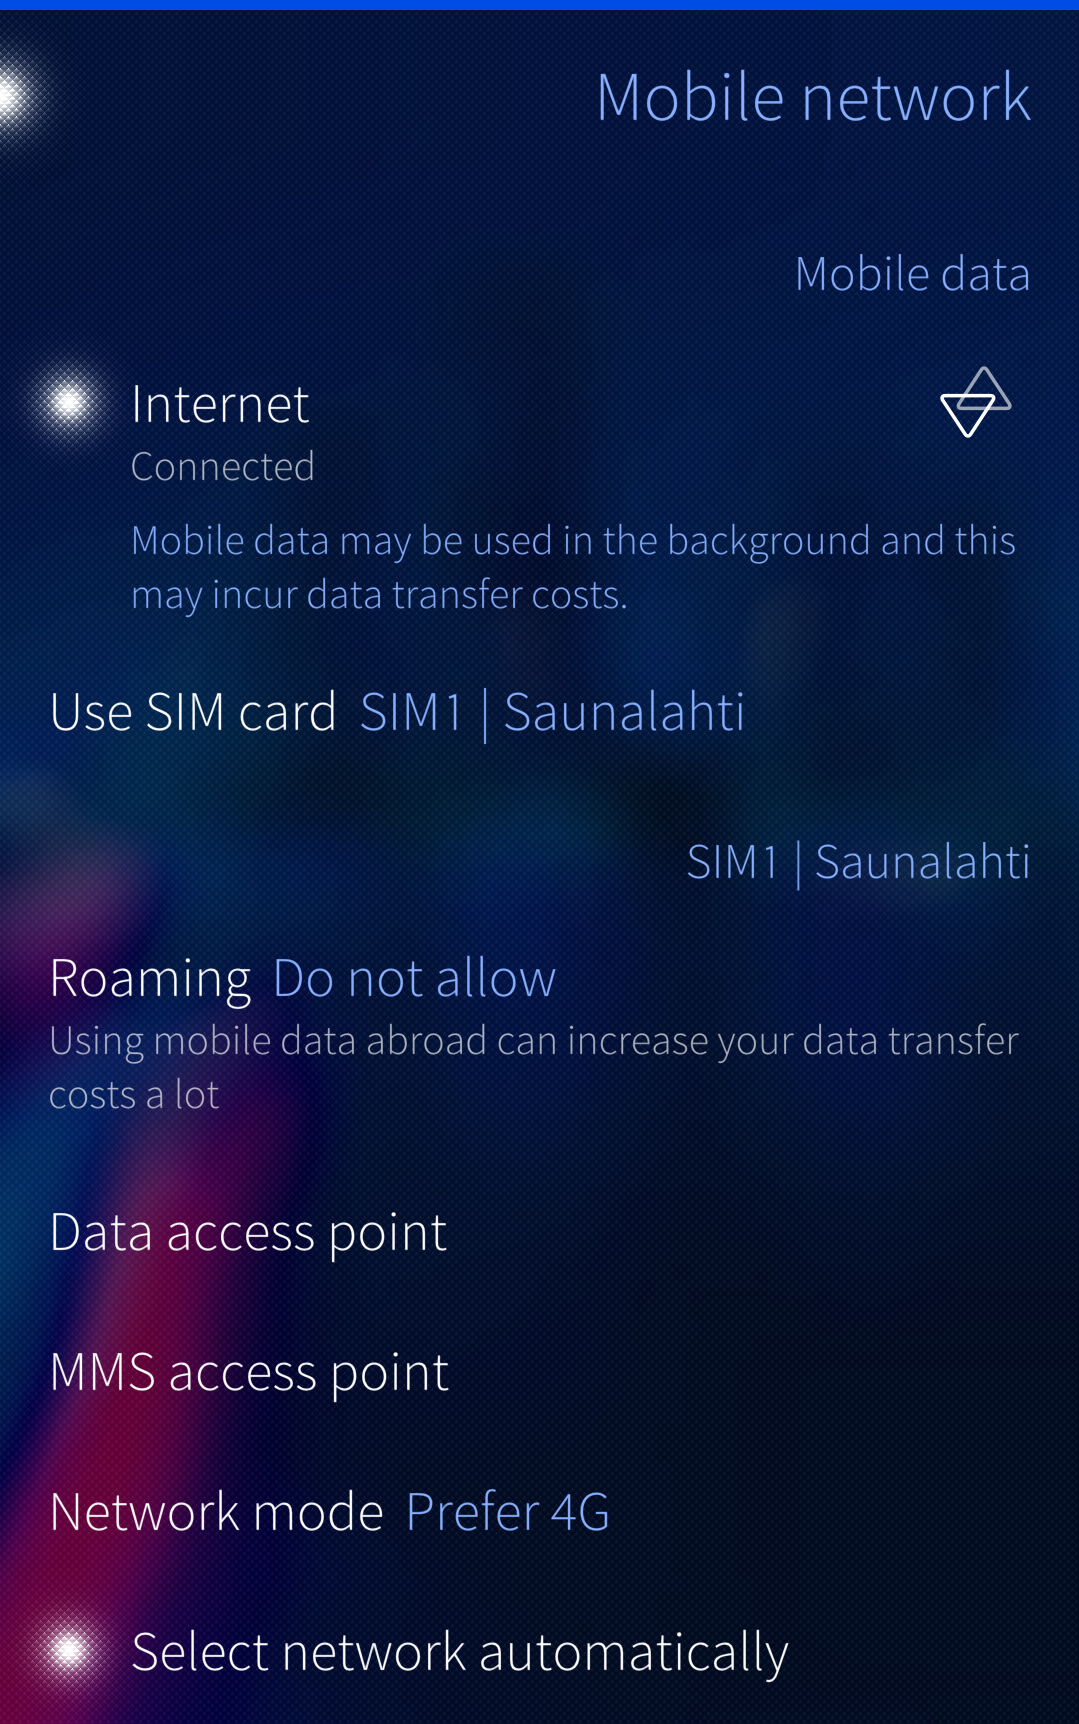 SIM card used for mobile data